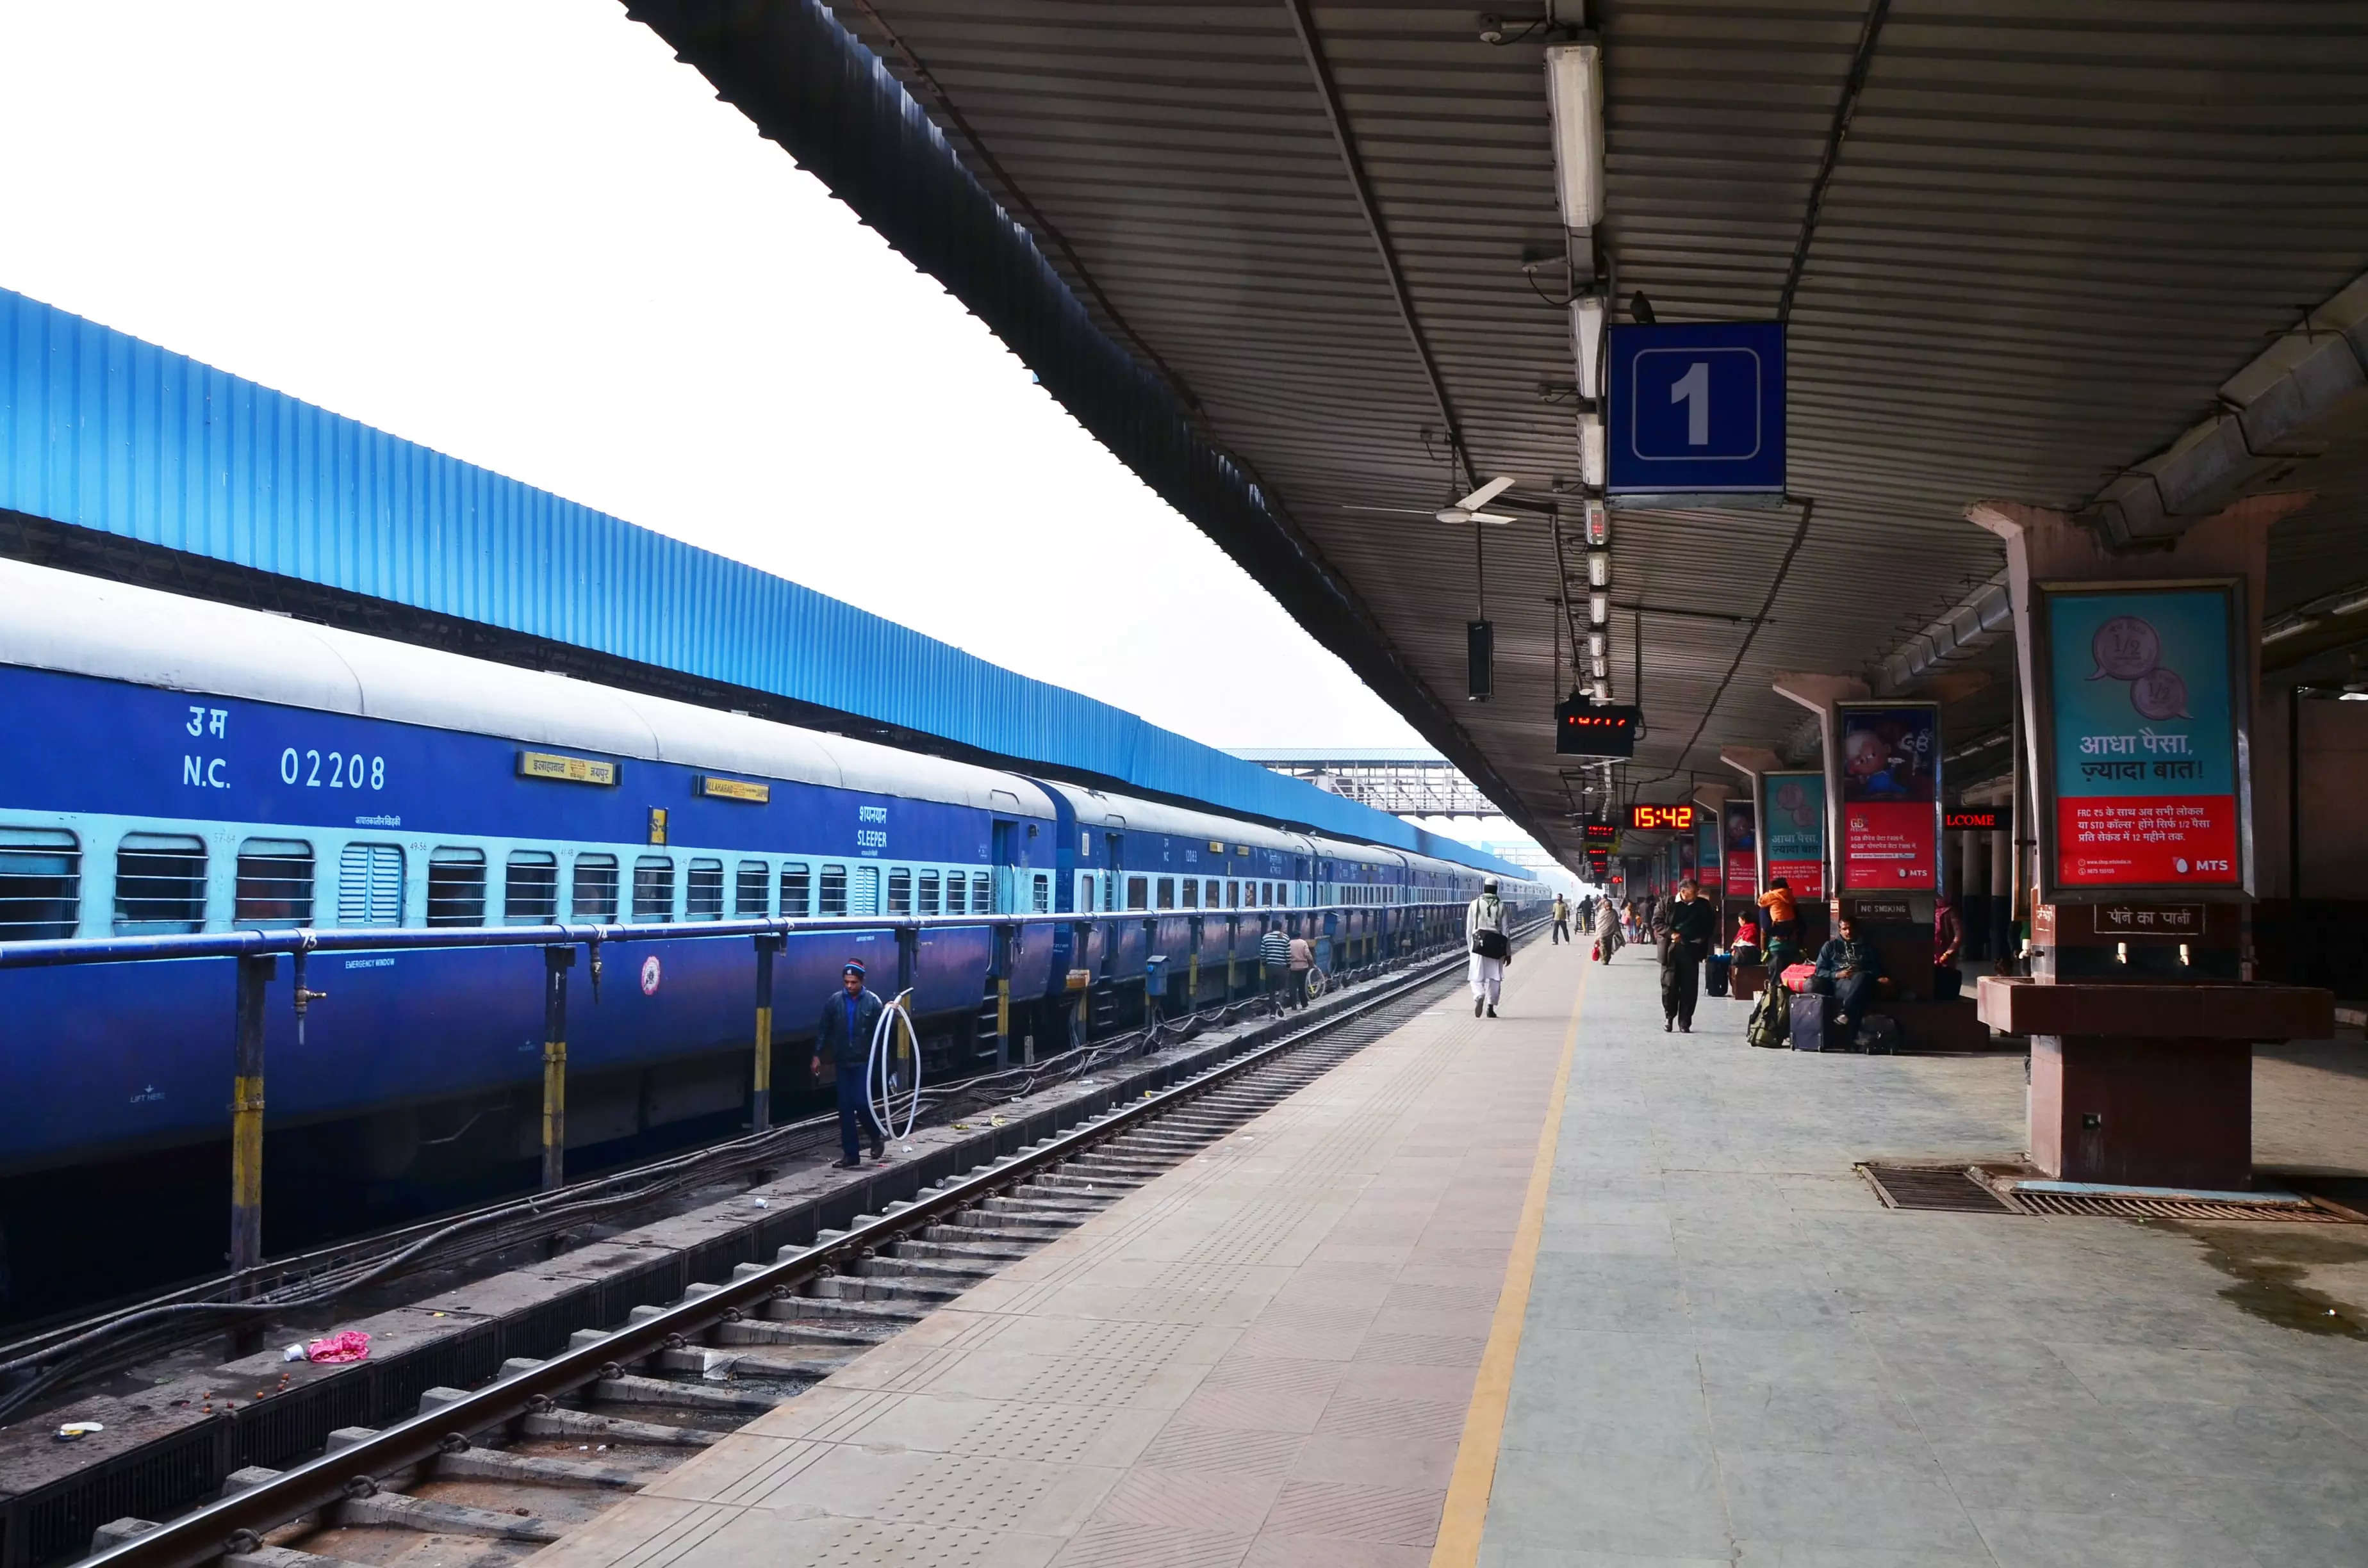 Jaipur railway station gets Rajasthan's first Eat Right station certificate